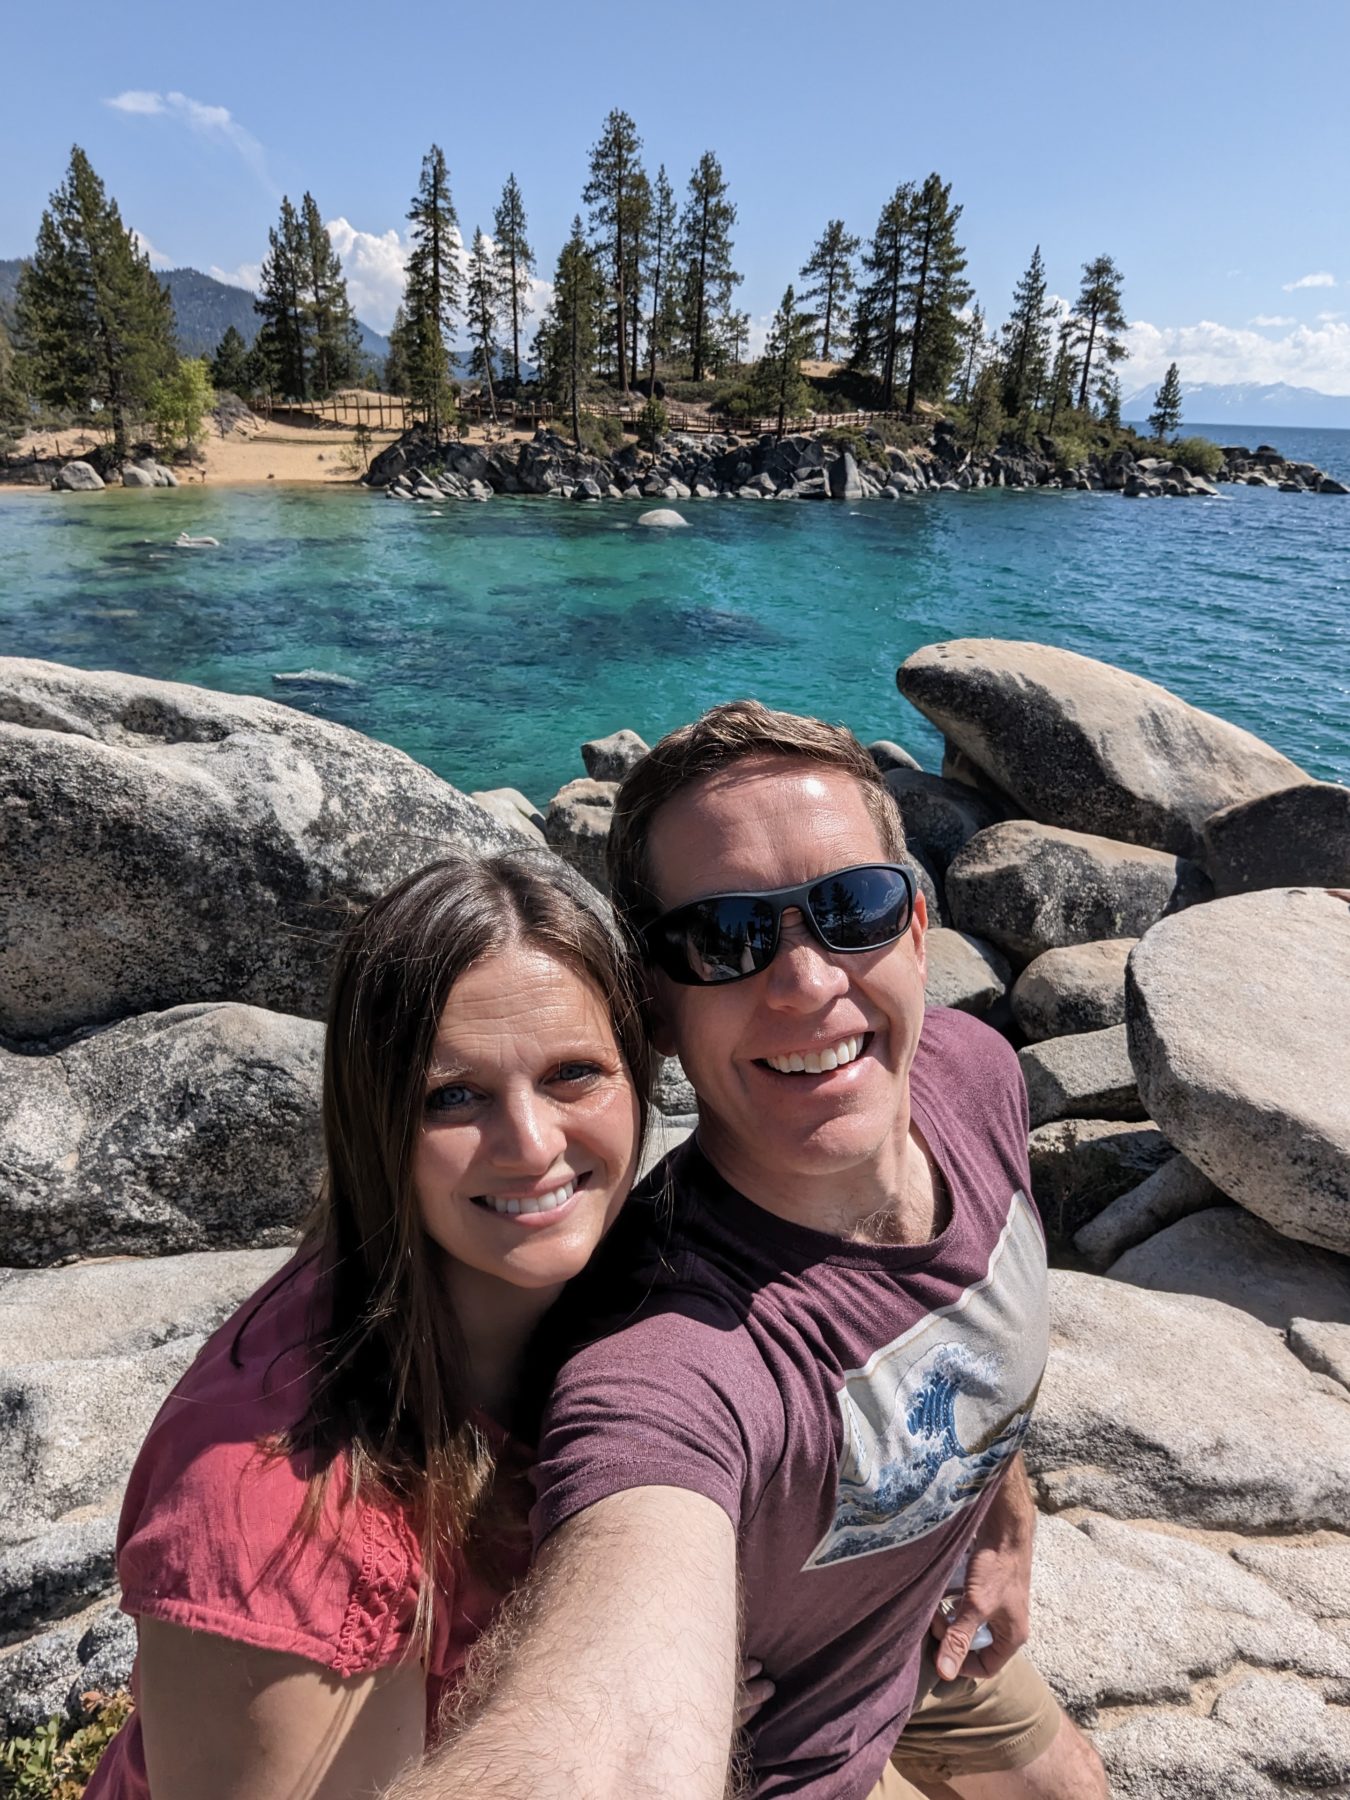 Things to do at Sand Harbor Lake Tahoe - photography